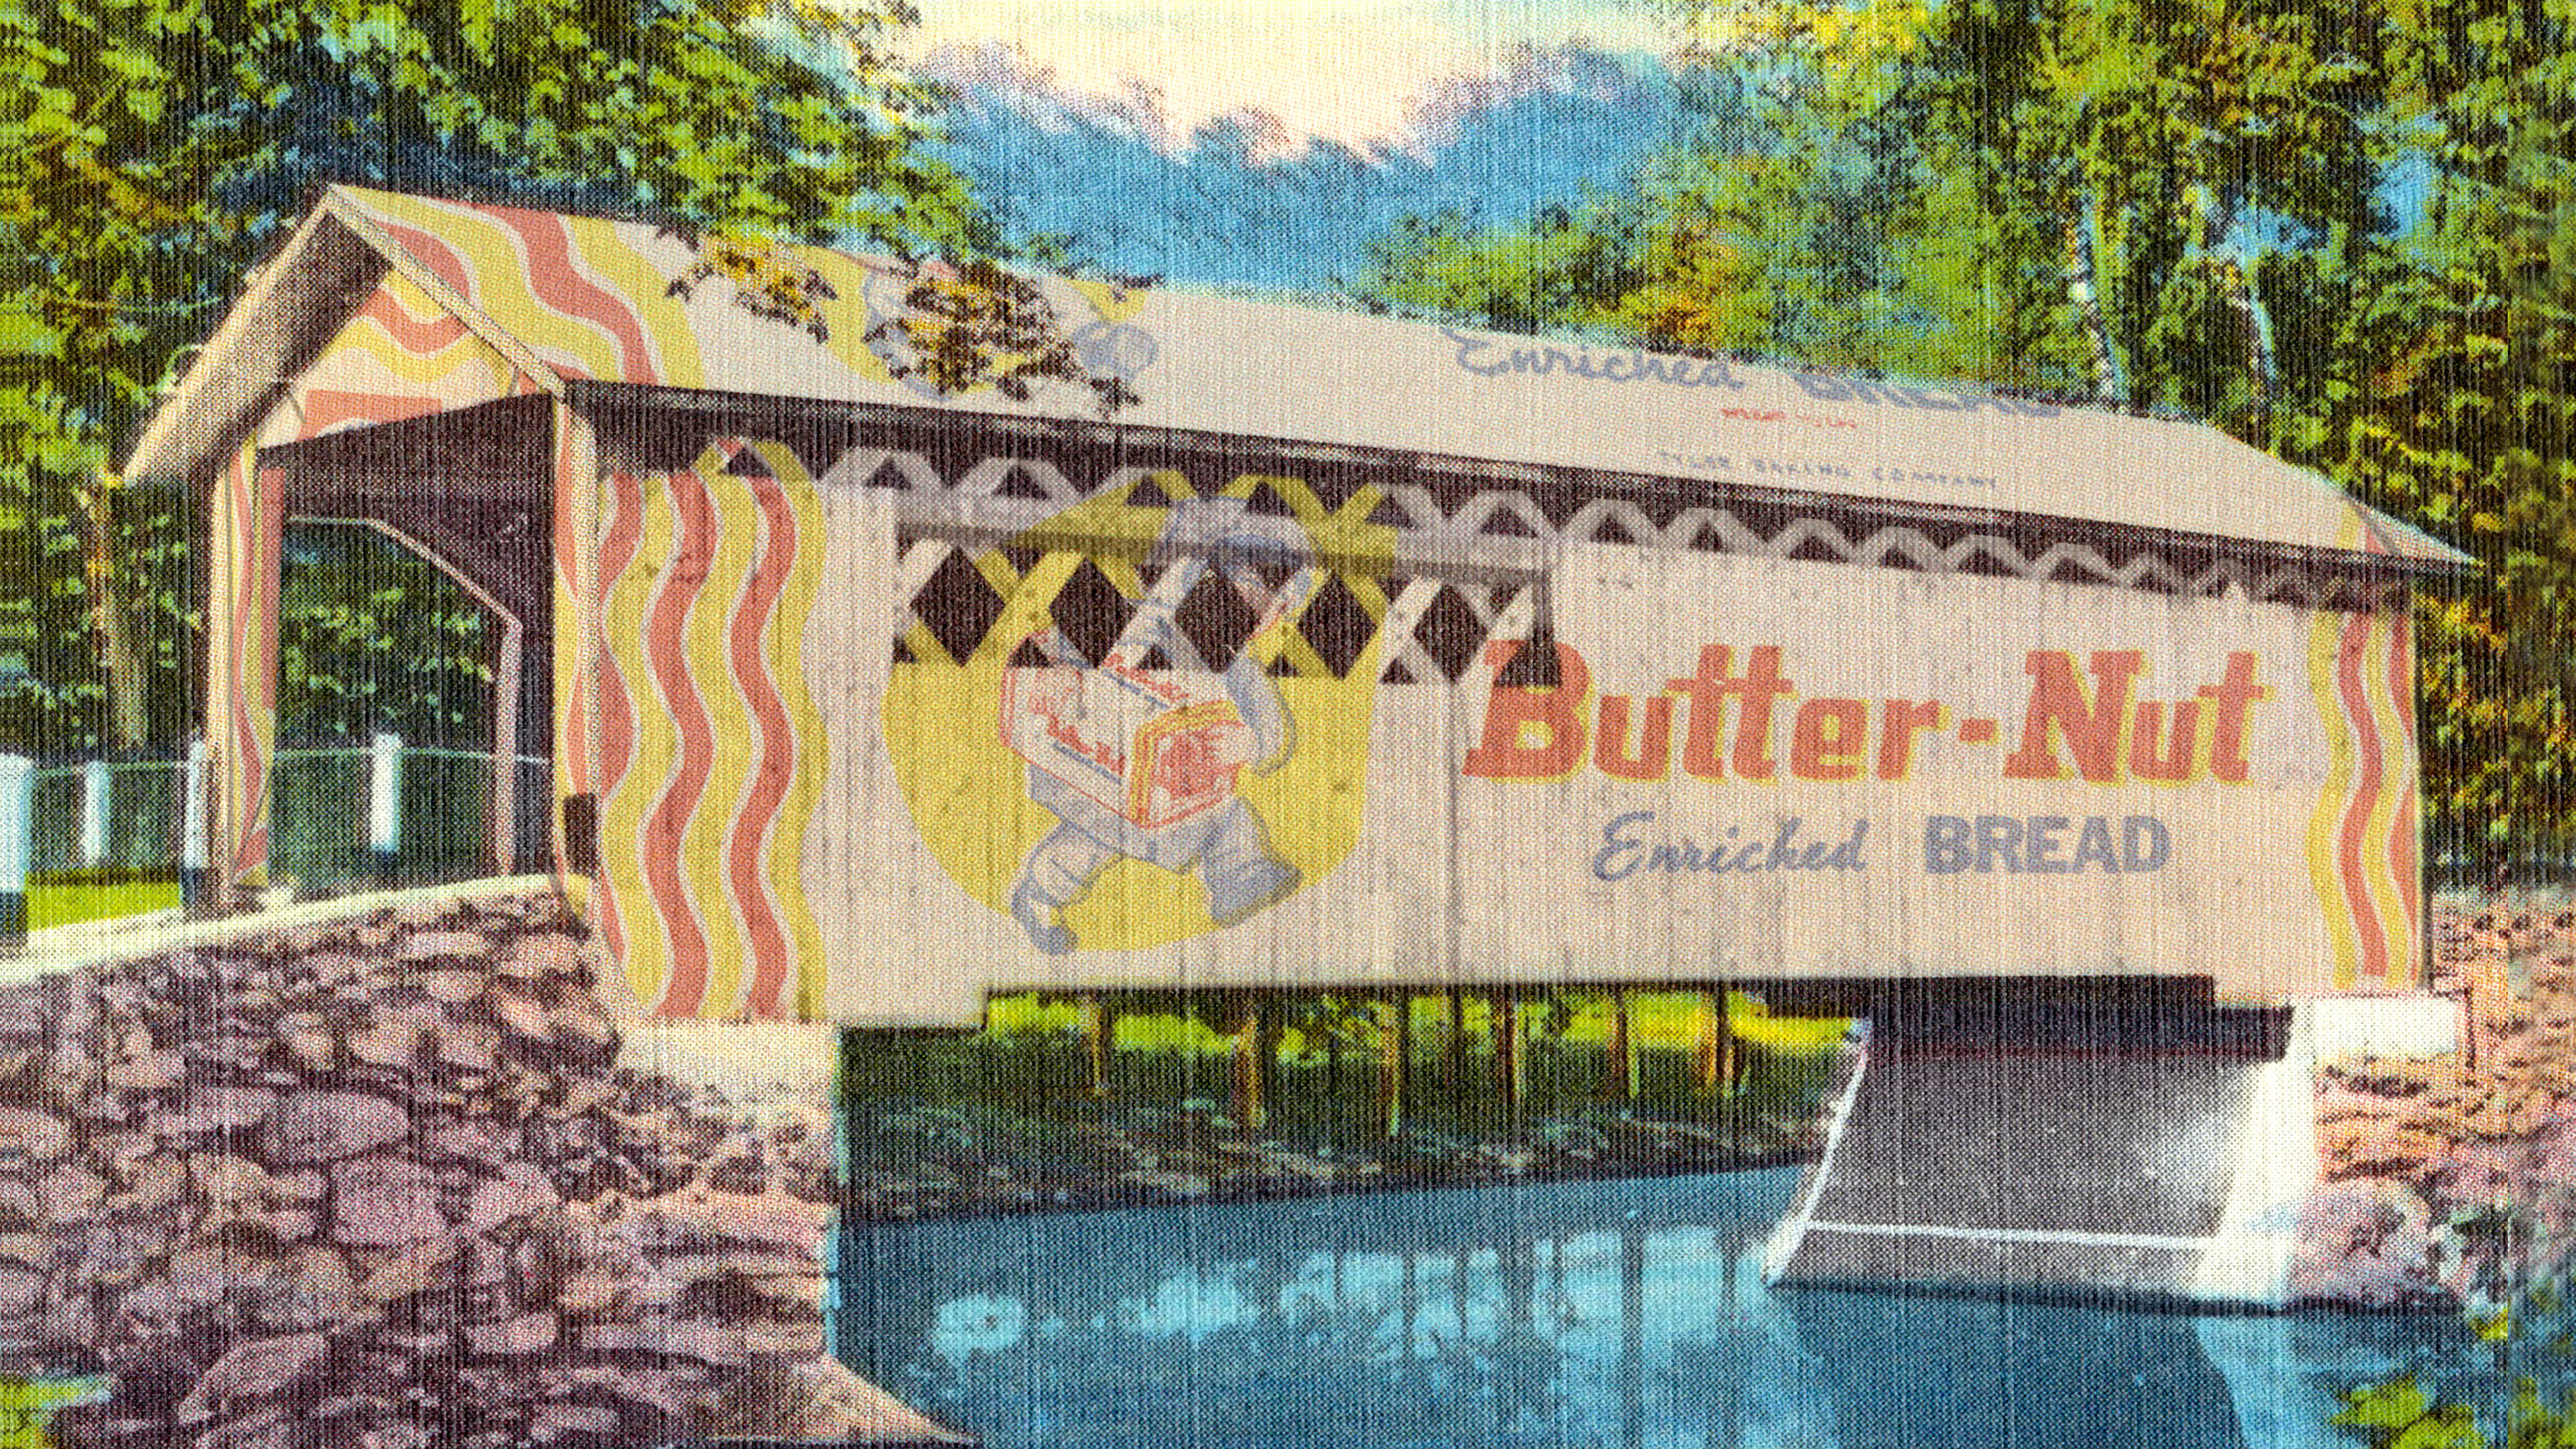 A digital montage image that combines a 1930s colorized postcard of a wooden covered bridge with stone pilings that stretched over a blue creek with the branding of a package of bread overlaying the bridge that reads "Butter-Nut Enriched Bread"